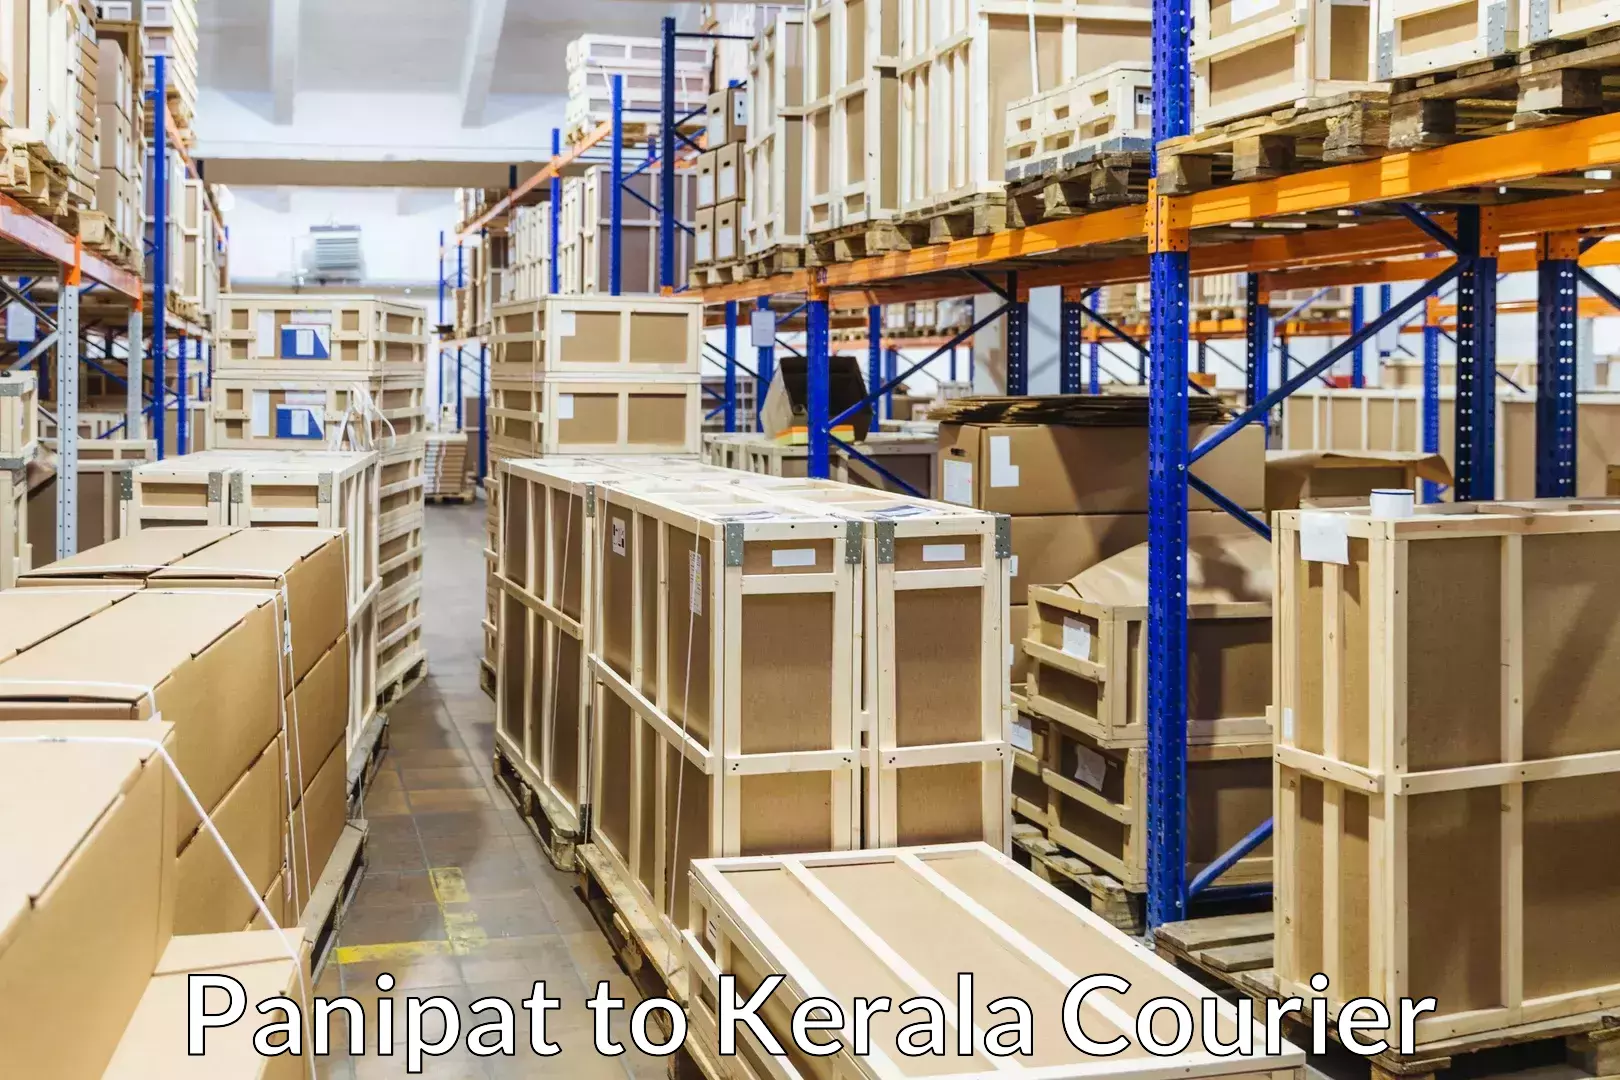 Reliable relocation services Panipat to Kerala